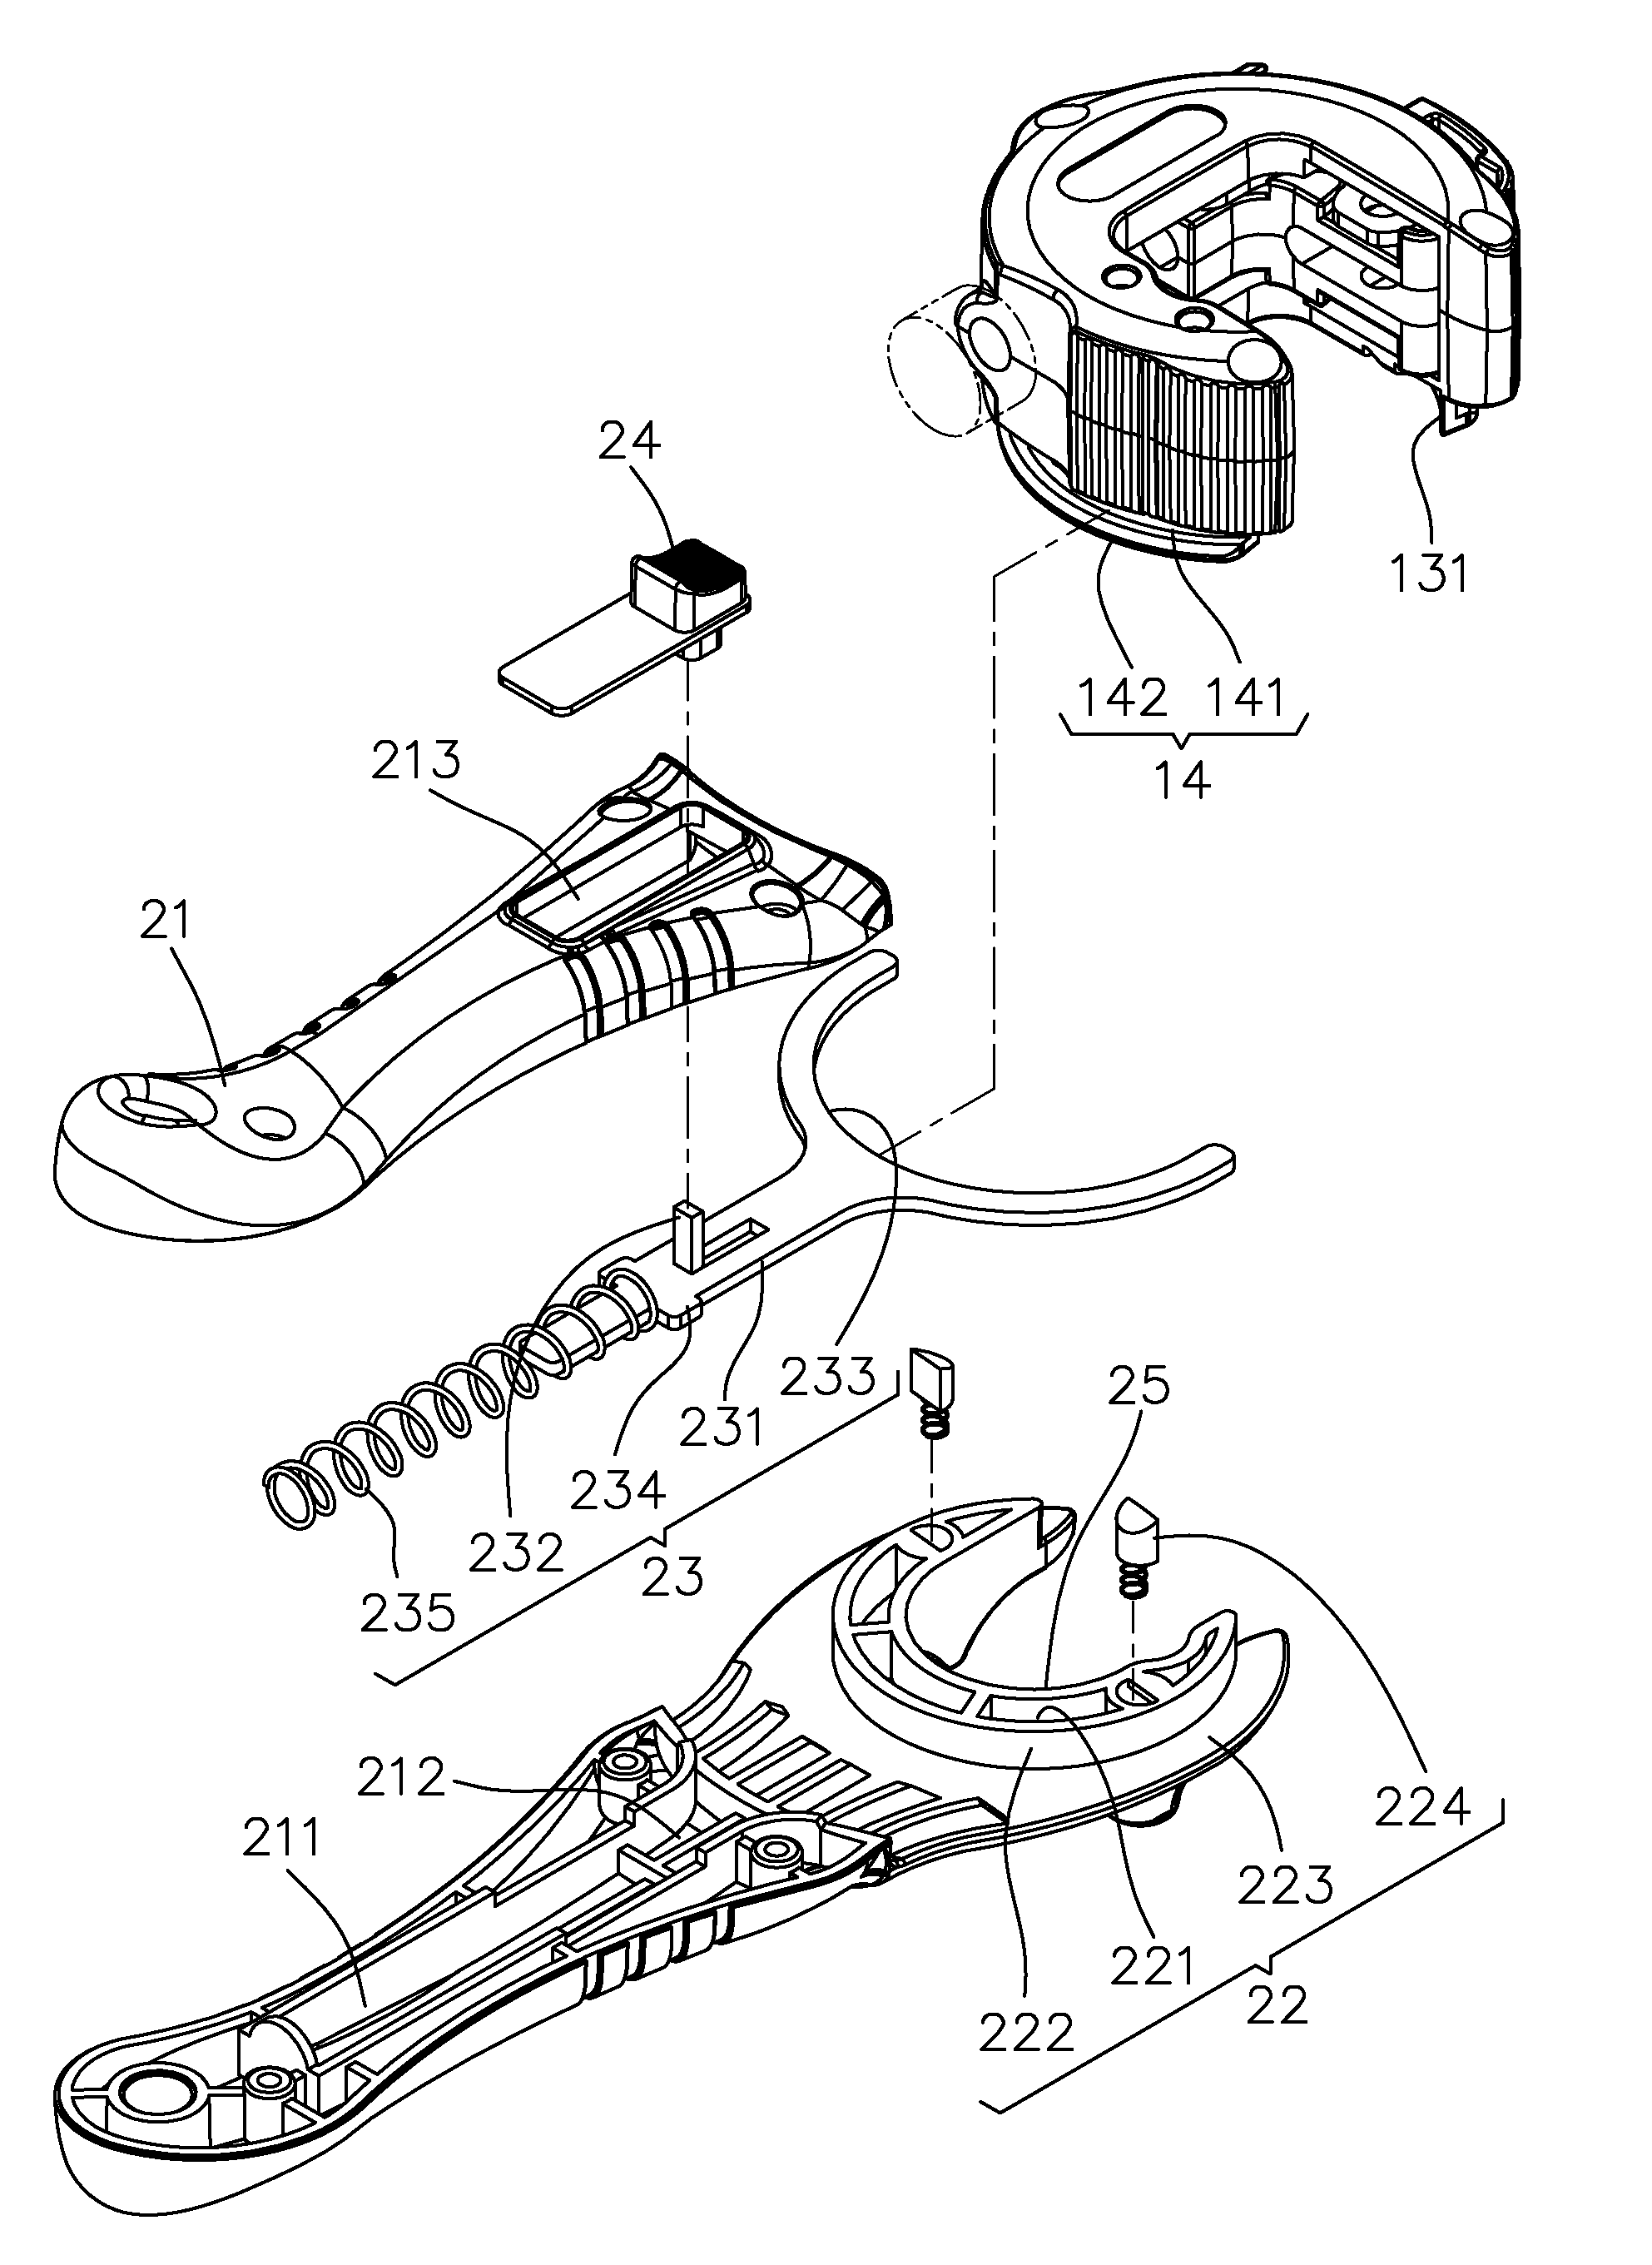 Tube cutting device with rapid separable handle